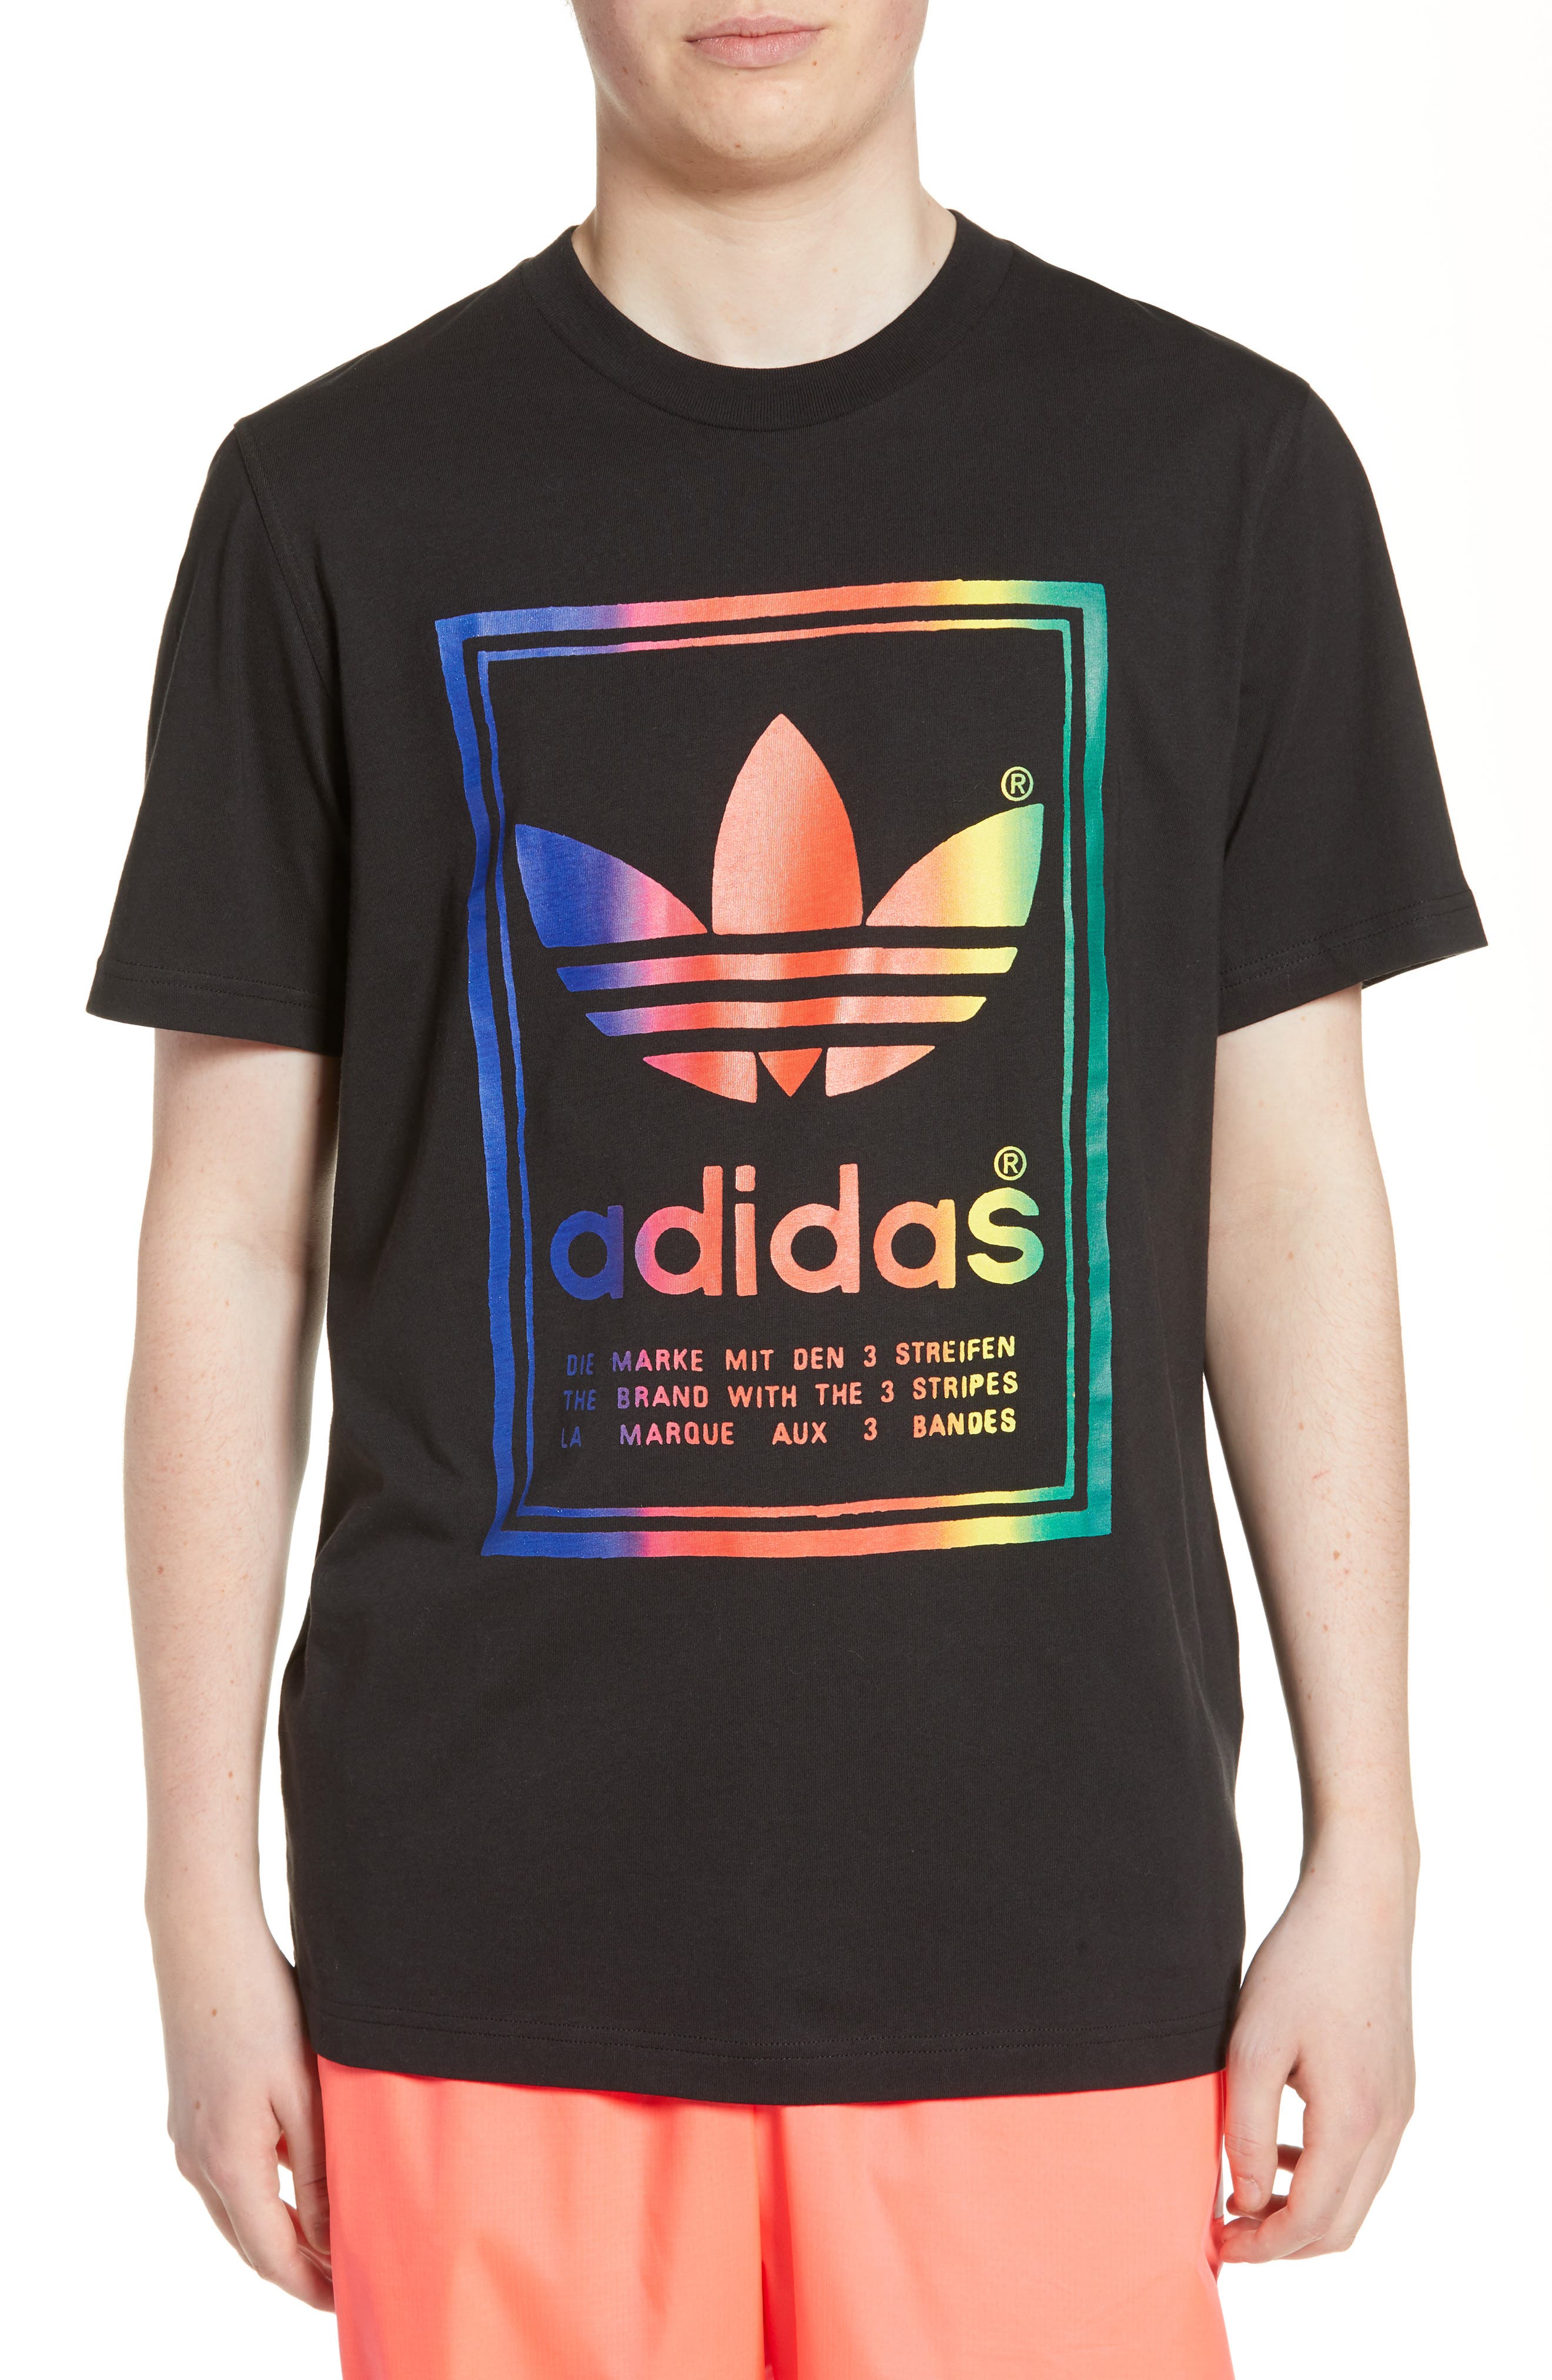 Adidas Colorful Shirt Online Deals, UP TO 50% OFF | www 